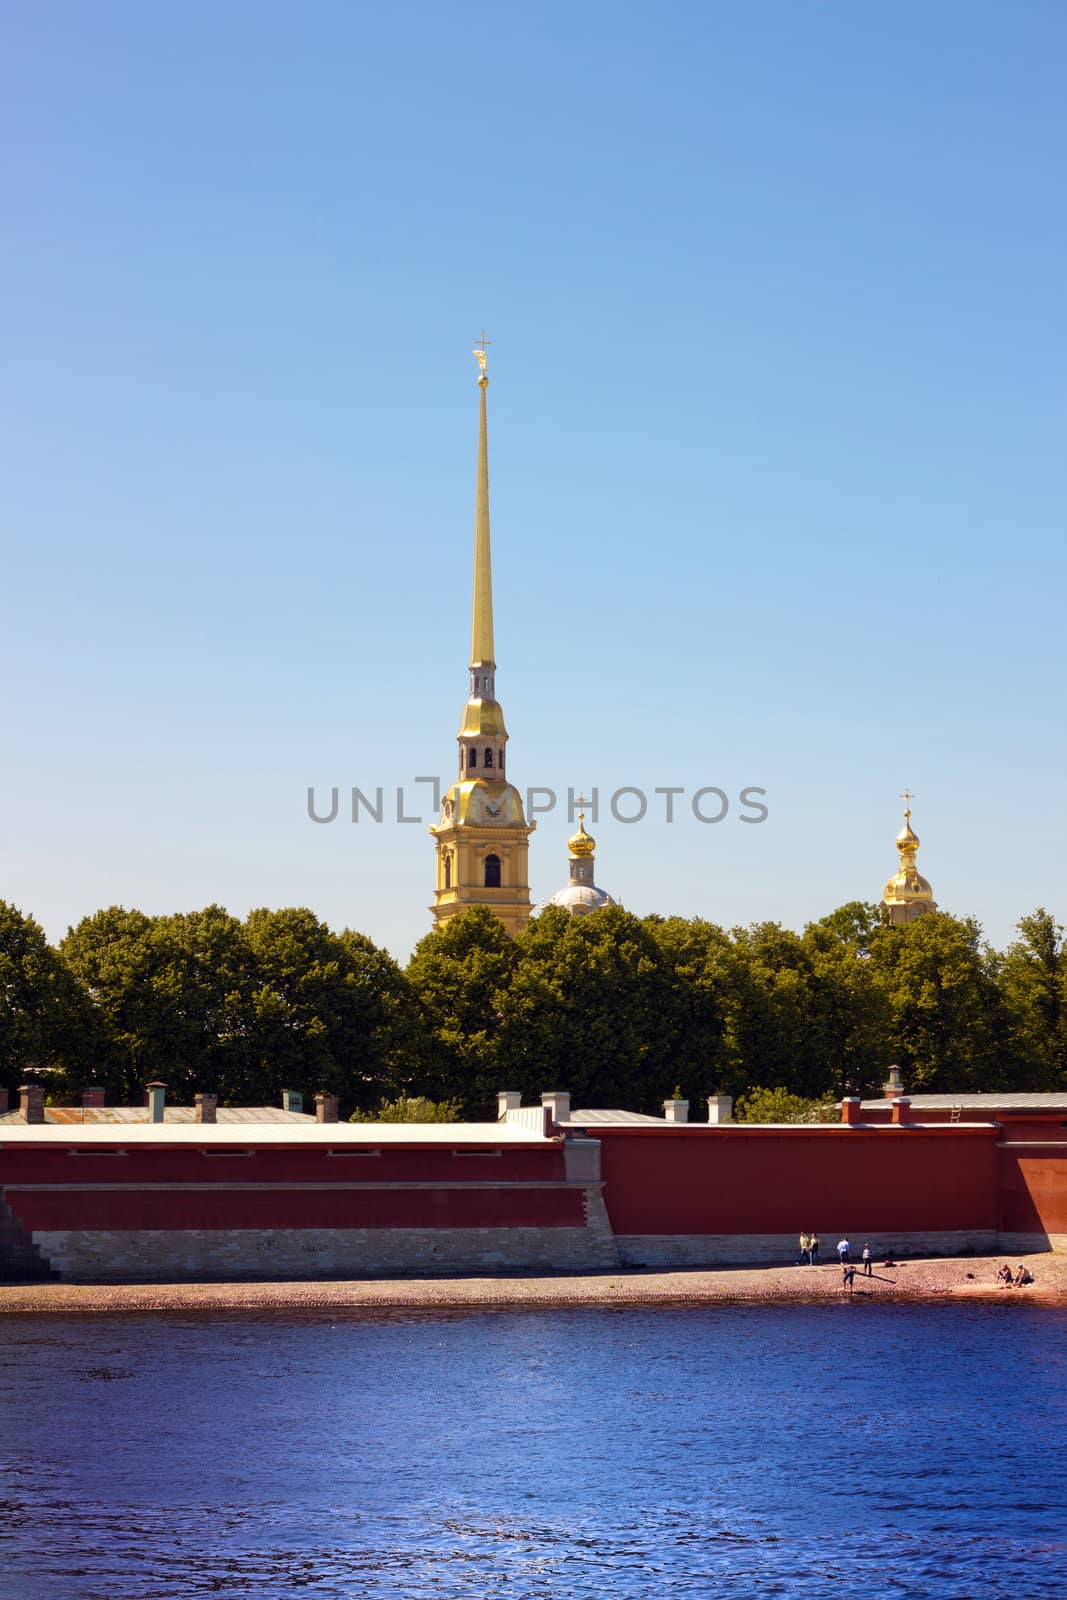 The Peter and Paul Fortress is the original citadel of St. Petersburg Russia